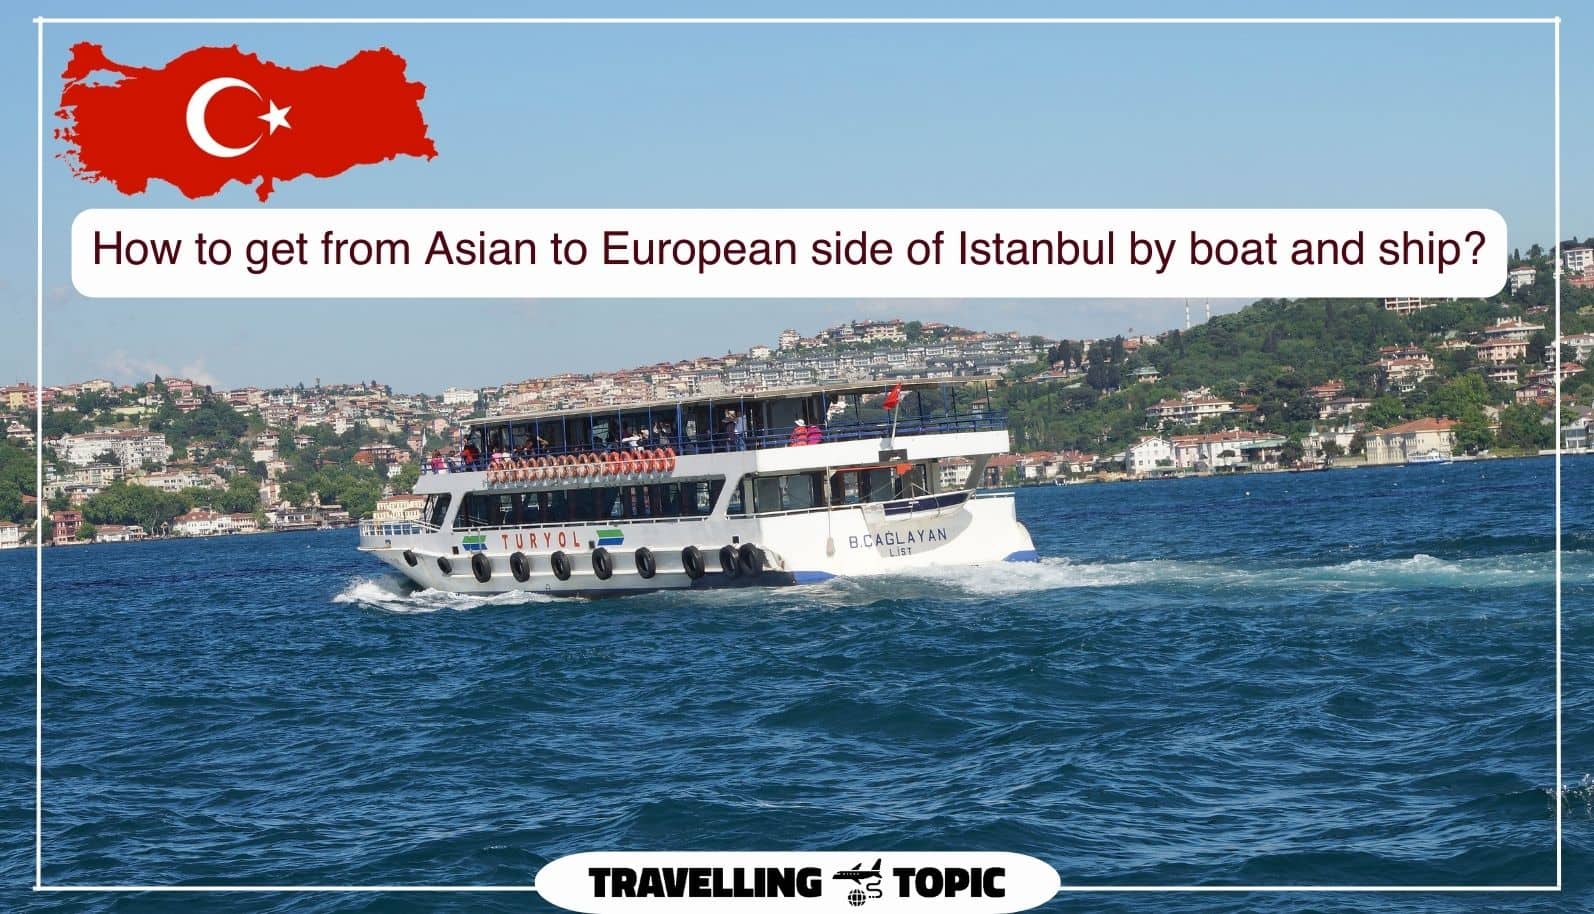 How to get from Asian to European side of Istanbul by boat and ship?